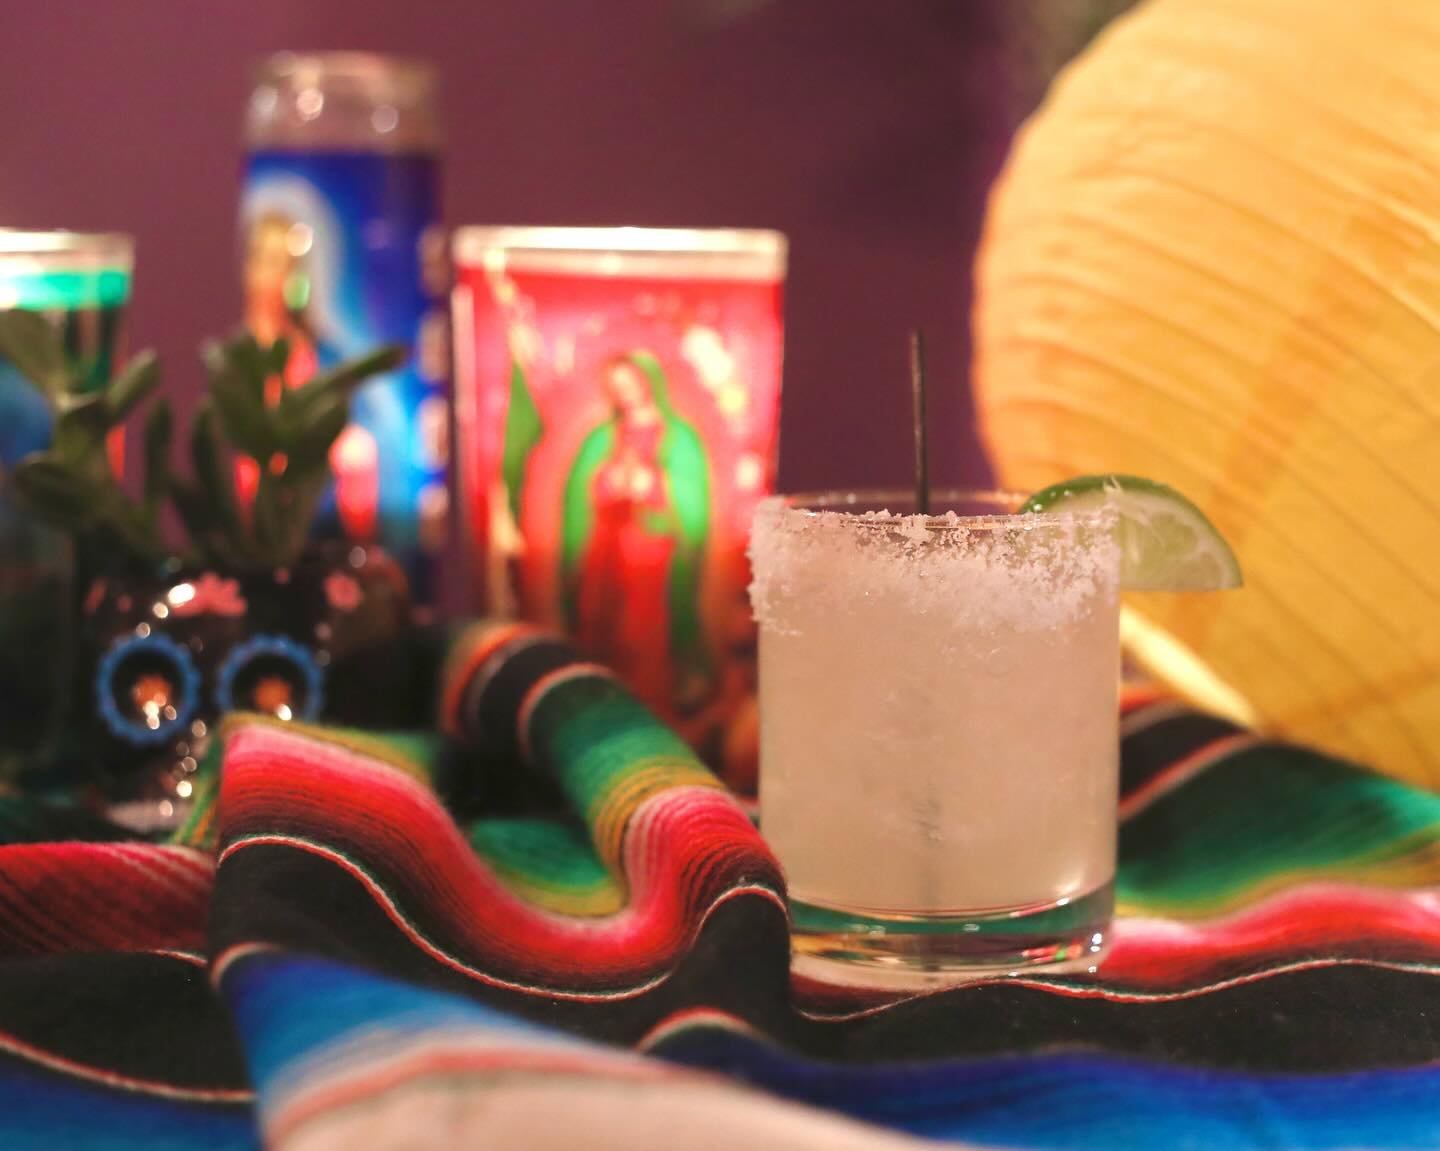 Do you like margaritas? How about $5 margaritas?! 🍹 

Get ready to sip and savor at our Cinco de Mayo Celebration on May 5th from 12-8pm! Join us for a fiesta filled with delicious drinks, mouthwatering food, and festive activities brought to you by